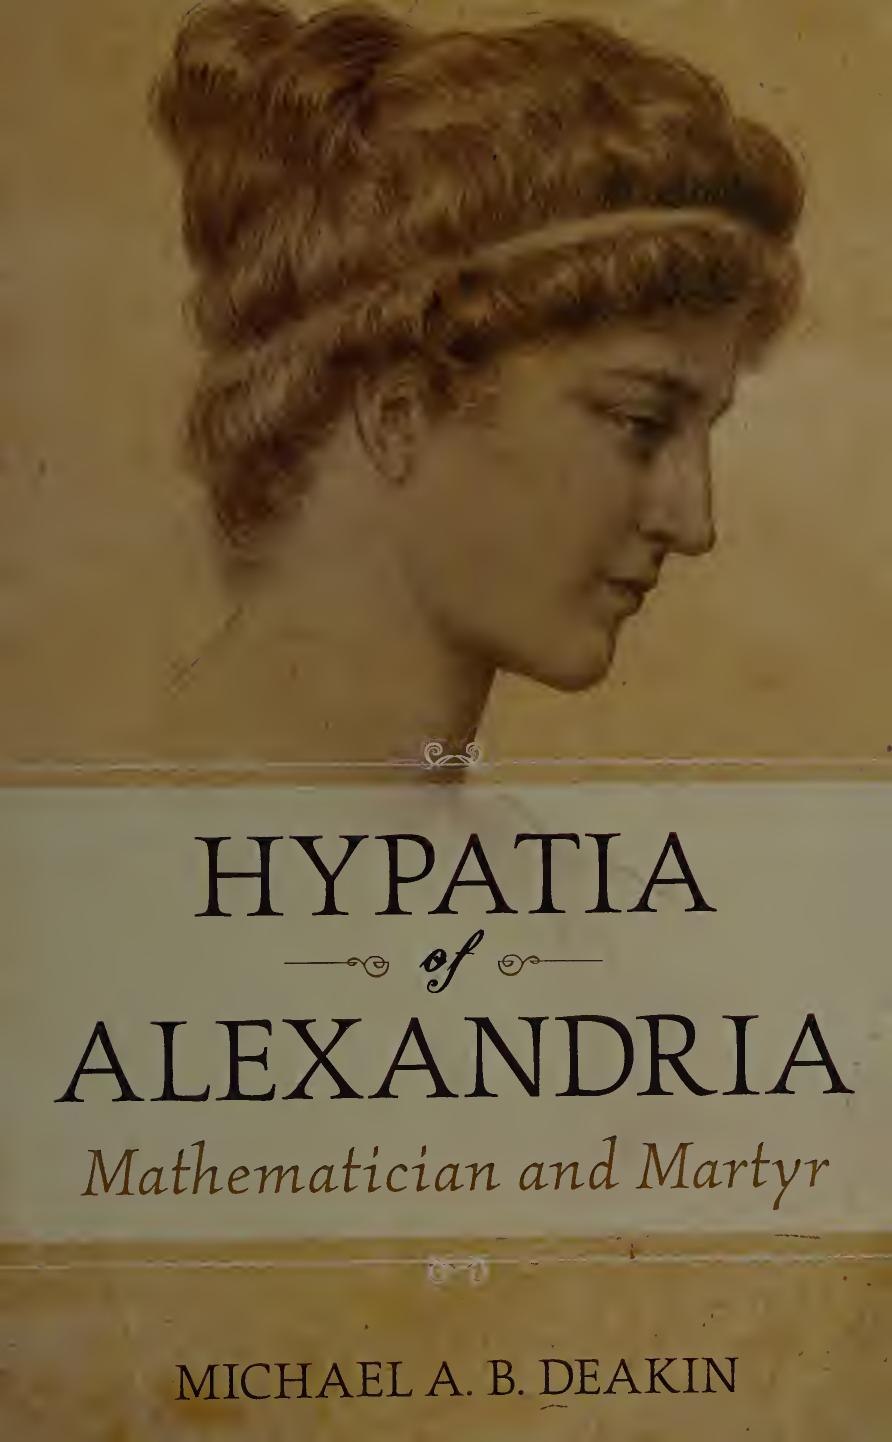 Hypatia of Alexandria: Mathematician and Martyr